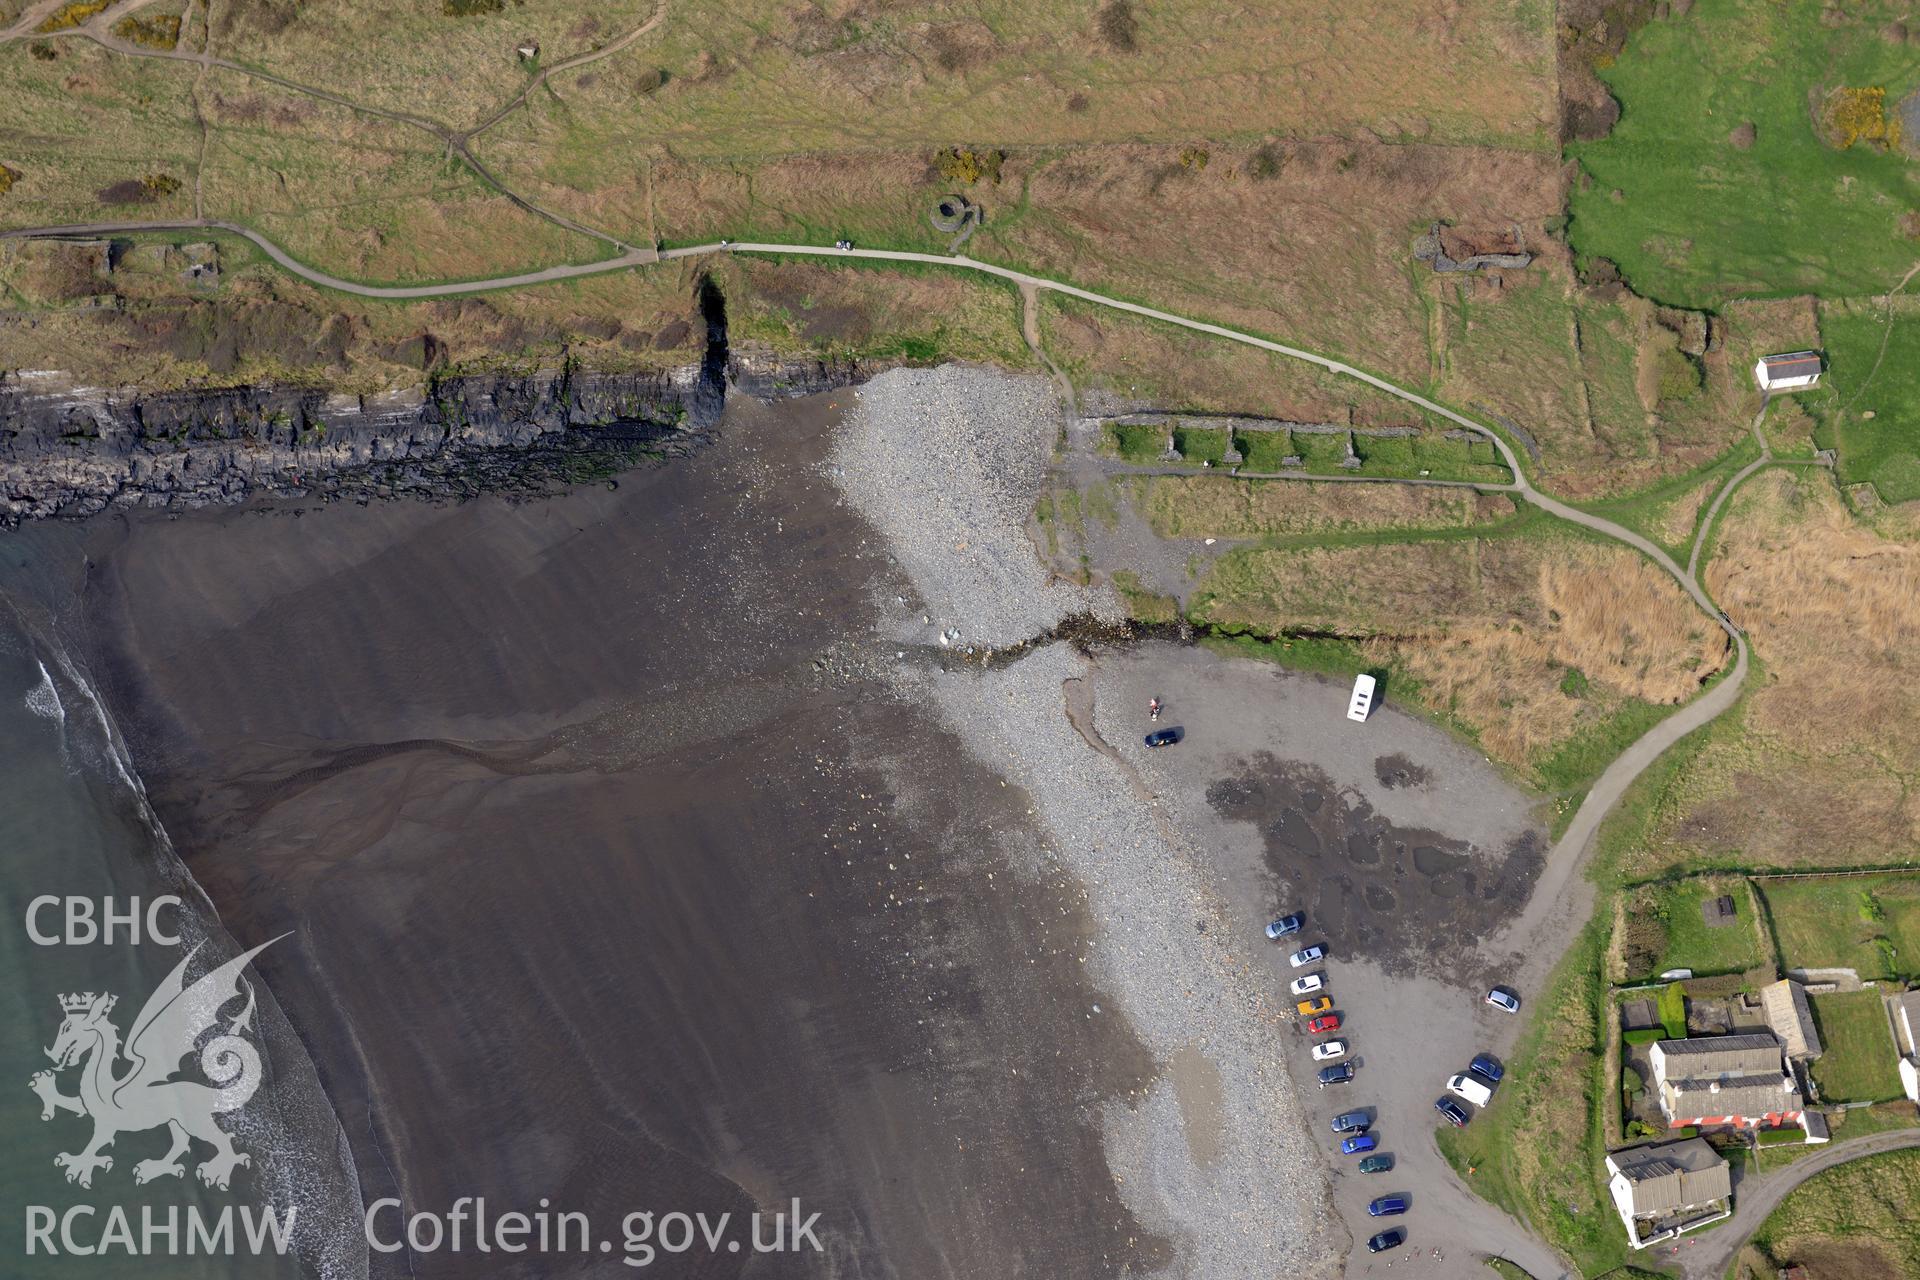 Royal Commission aerial photograph of Abereiddi quarryman's cottages taken on 27th March 2017. Baseline aerial reconnaissance survey for the CHERISH Project. ? Crown: CHERISH PROJECT 2017. Produced with EU funds through the Ireland Wales Co-operation Programme 2014-2020. All material made freely available through the Open Government Licence.